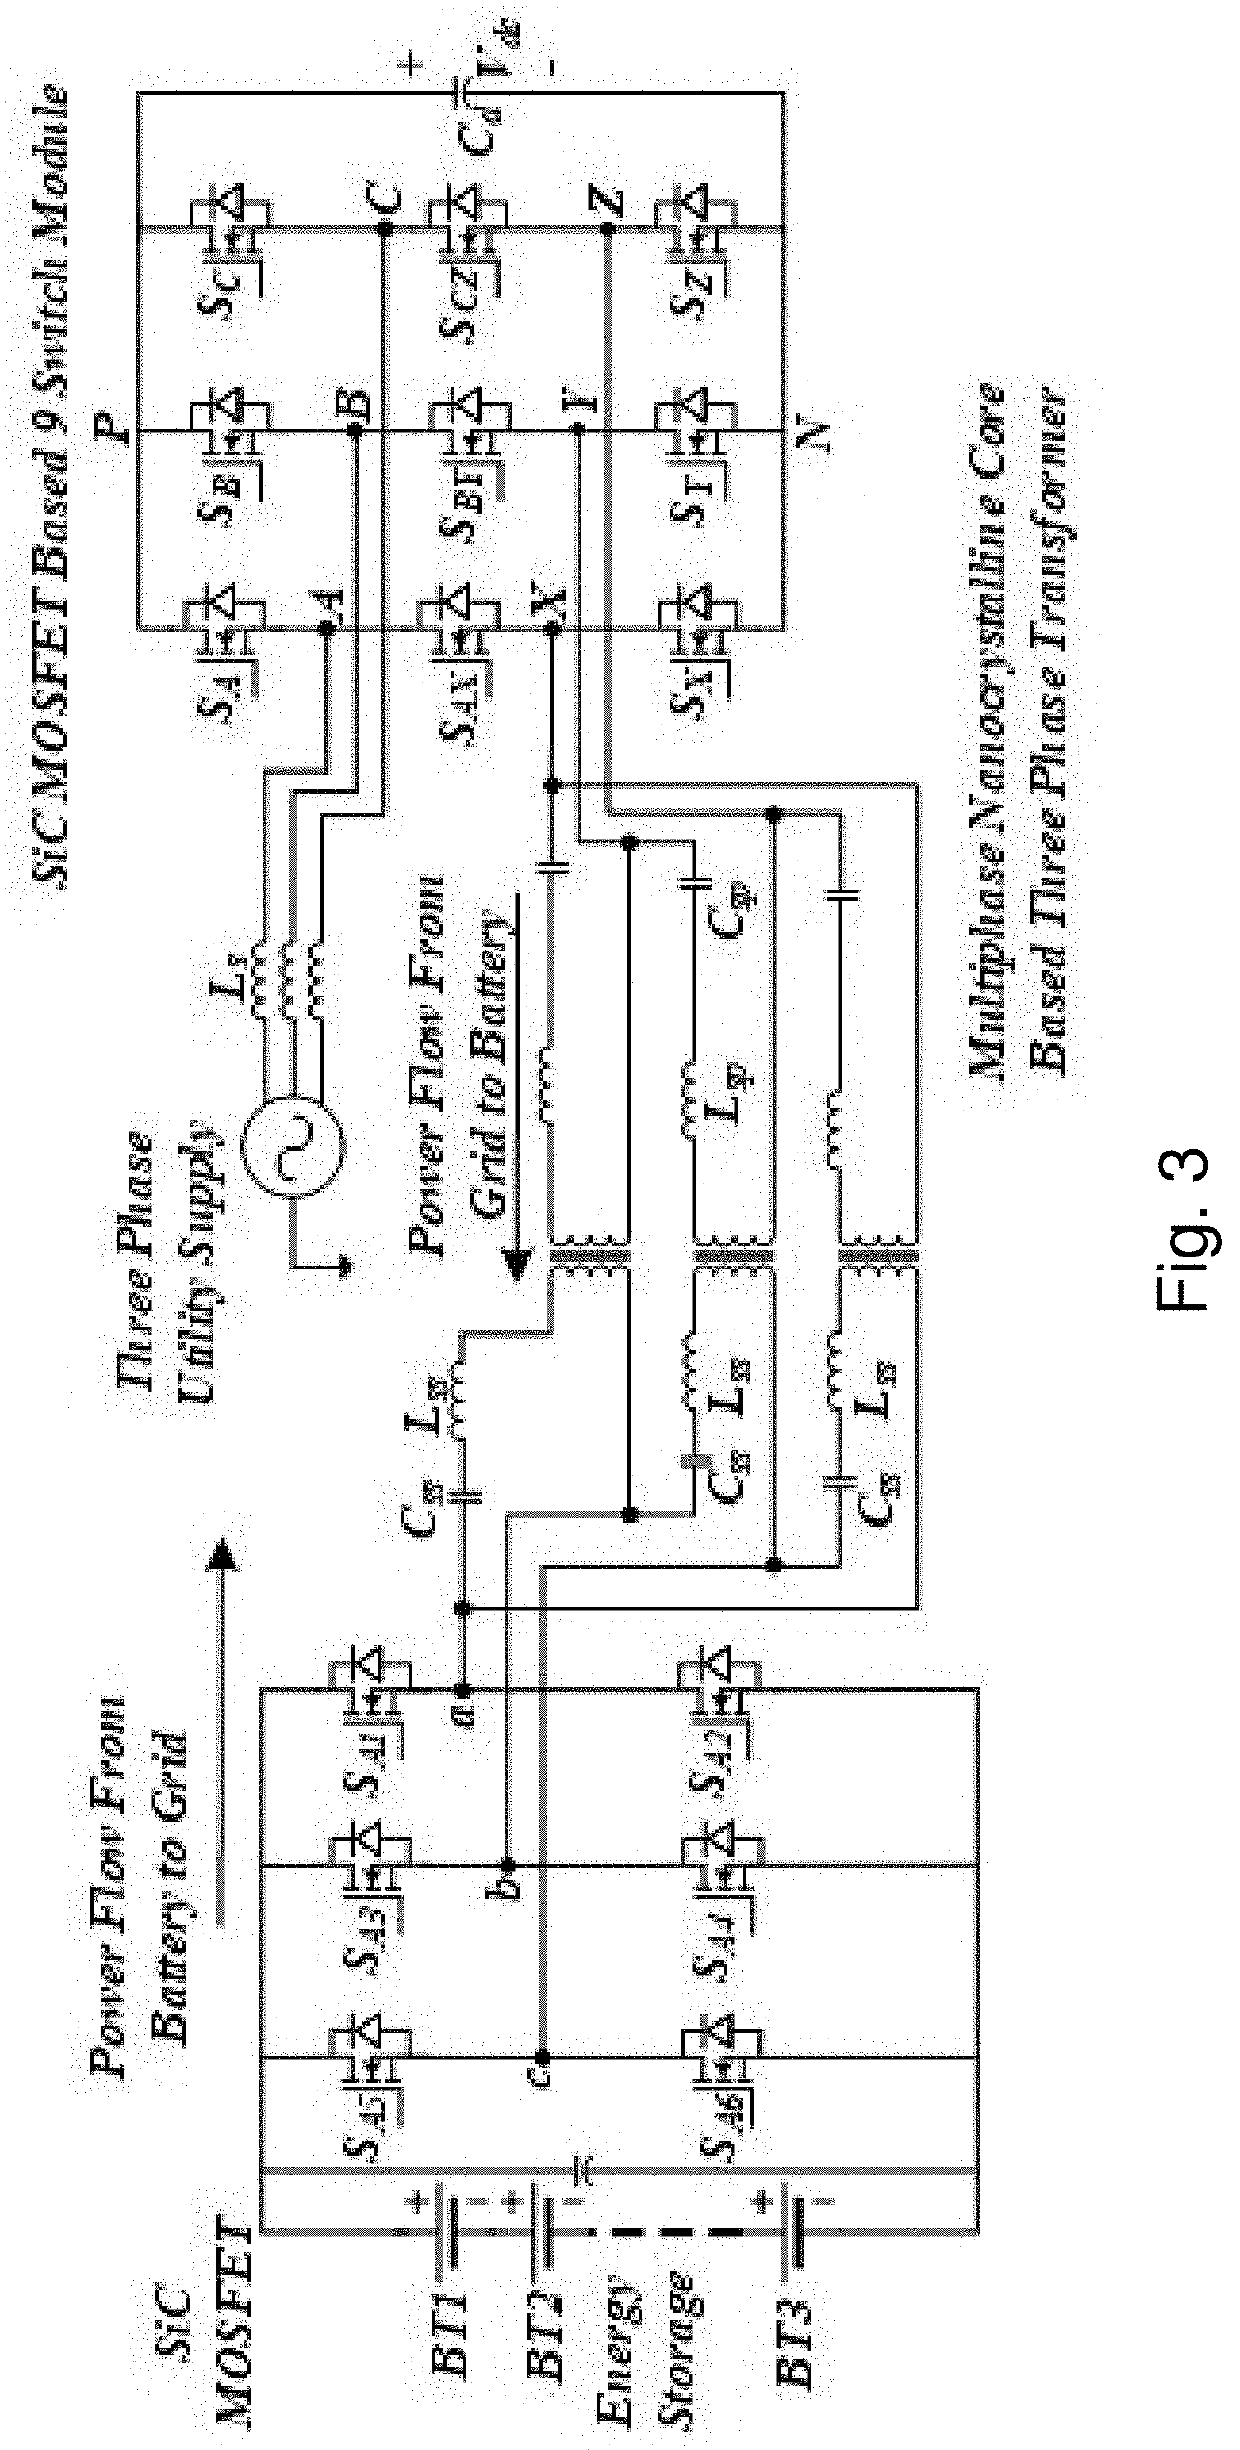 Three phase bidirectional ac-dc converter with bipolar voltage fed resonant stages